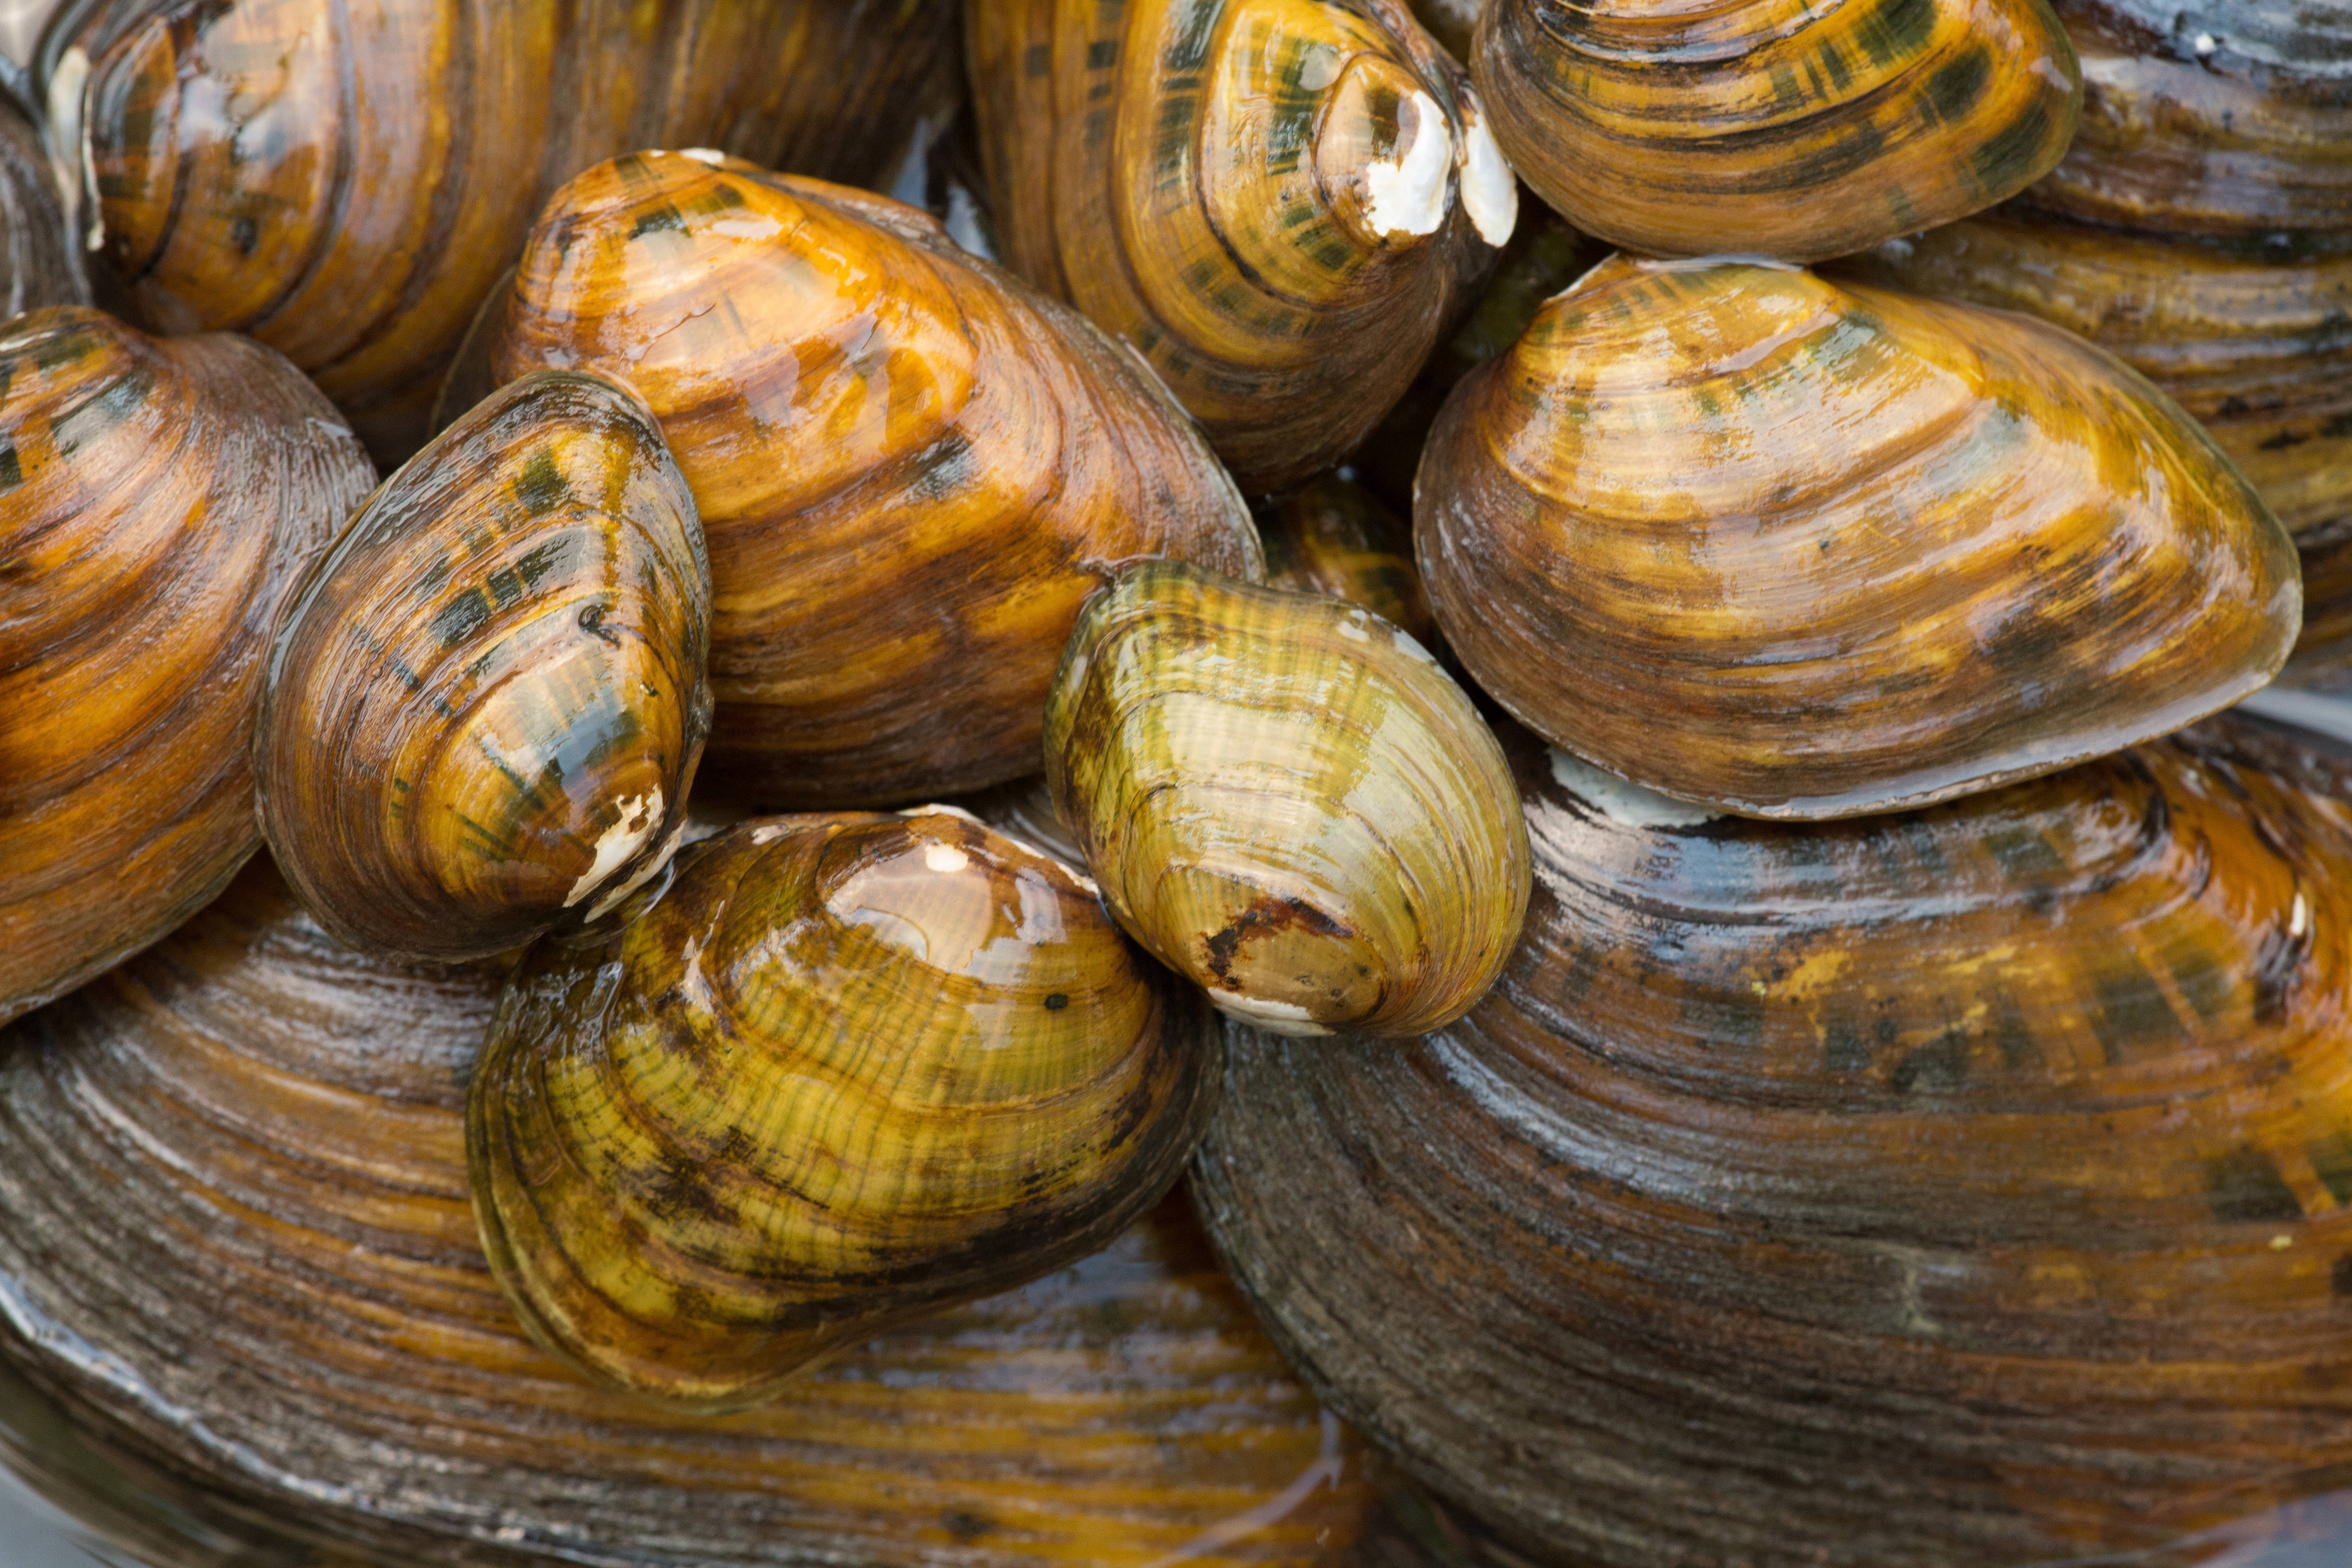 A pile of freshwater mussels of varying size.